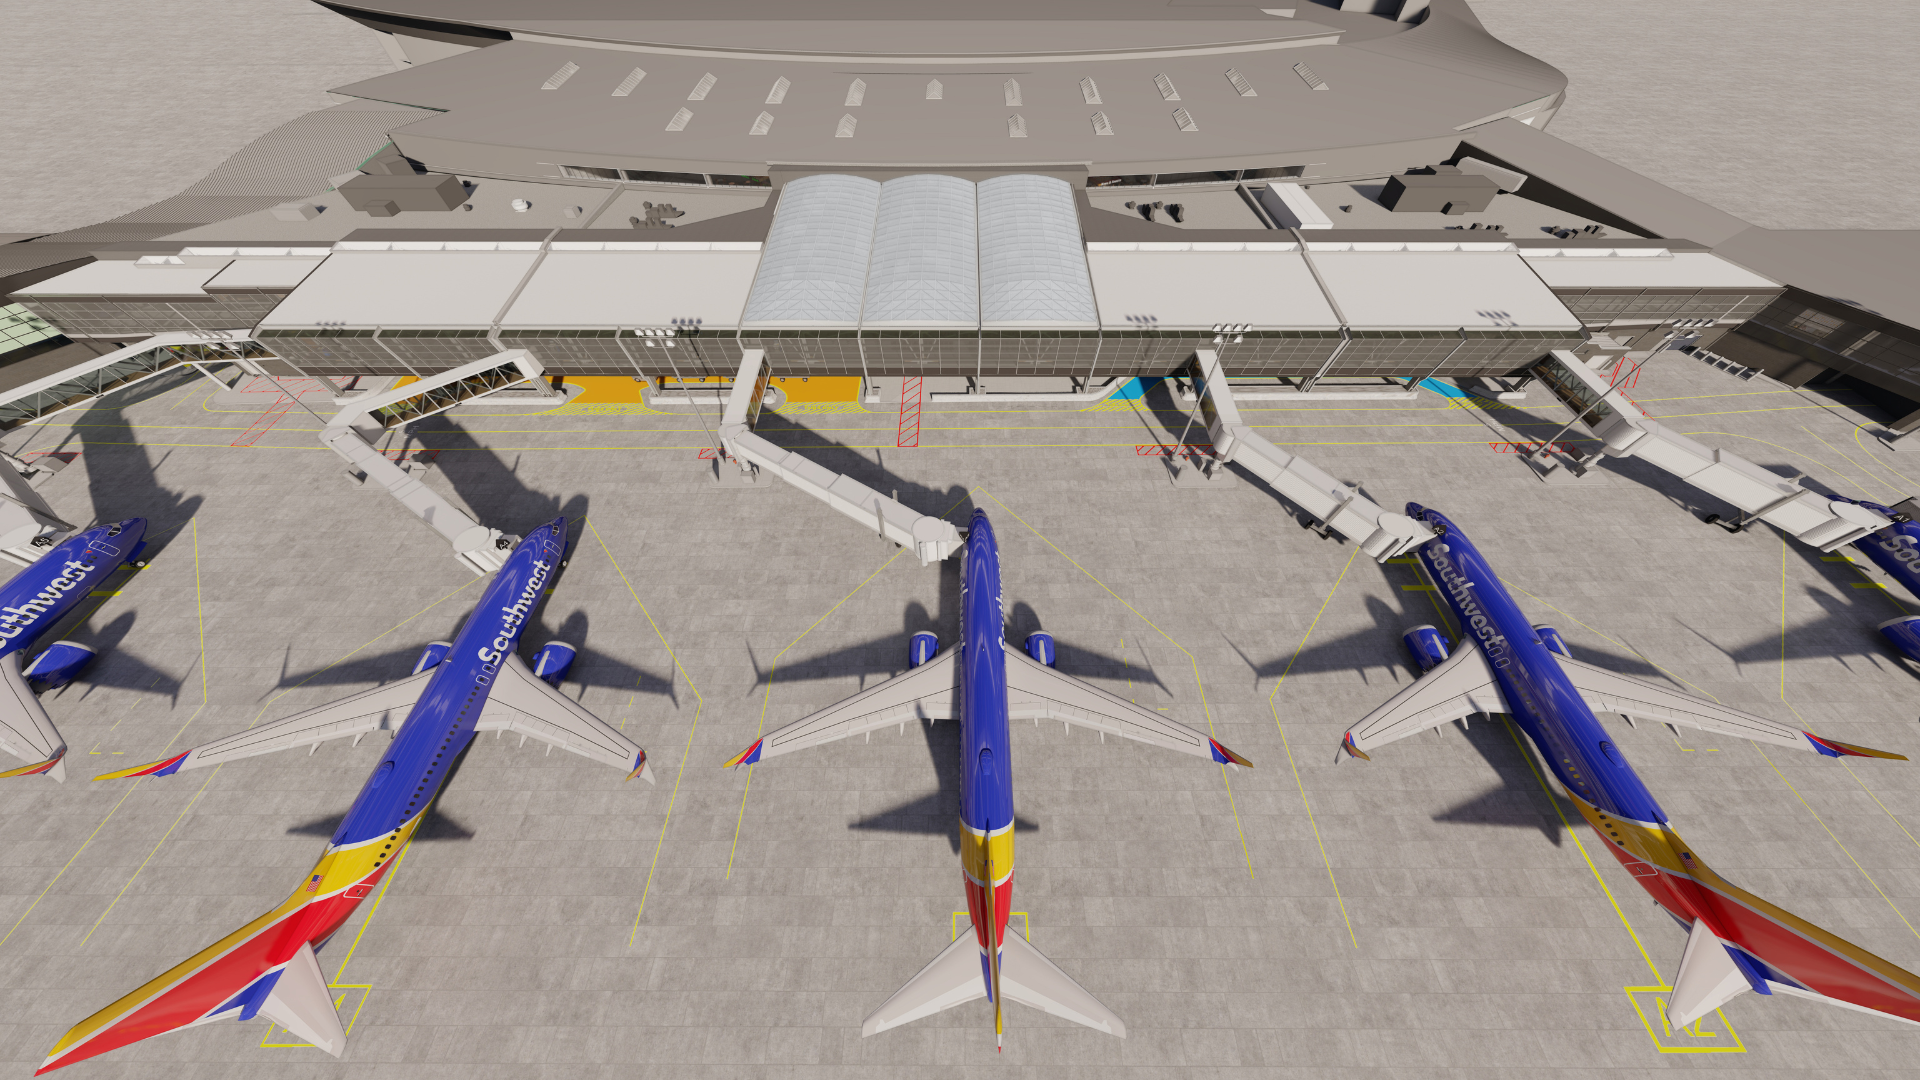 Rendering showing Southwest Airlines aircraft at aircraft gates currently under construction at BWI Marshall Airport